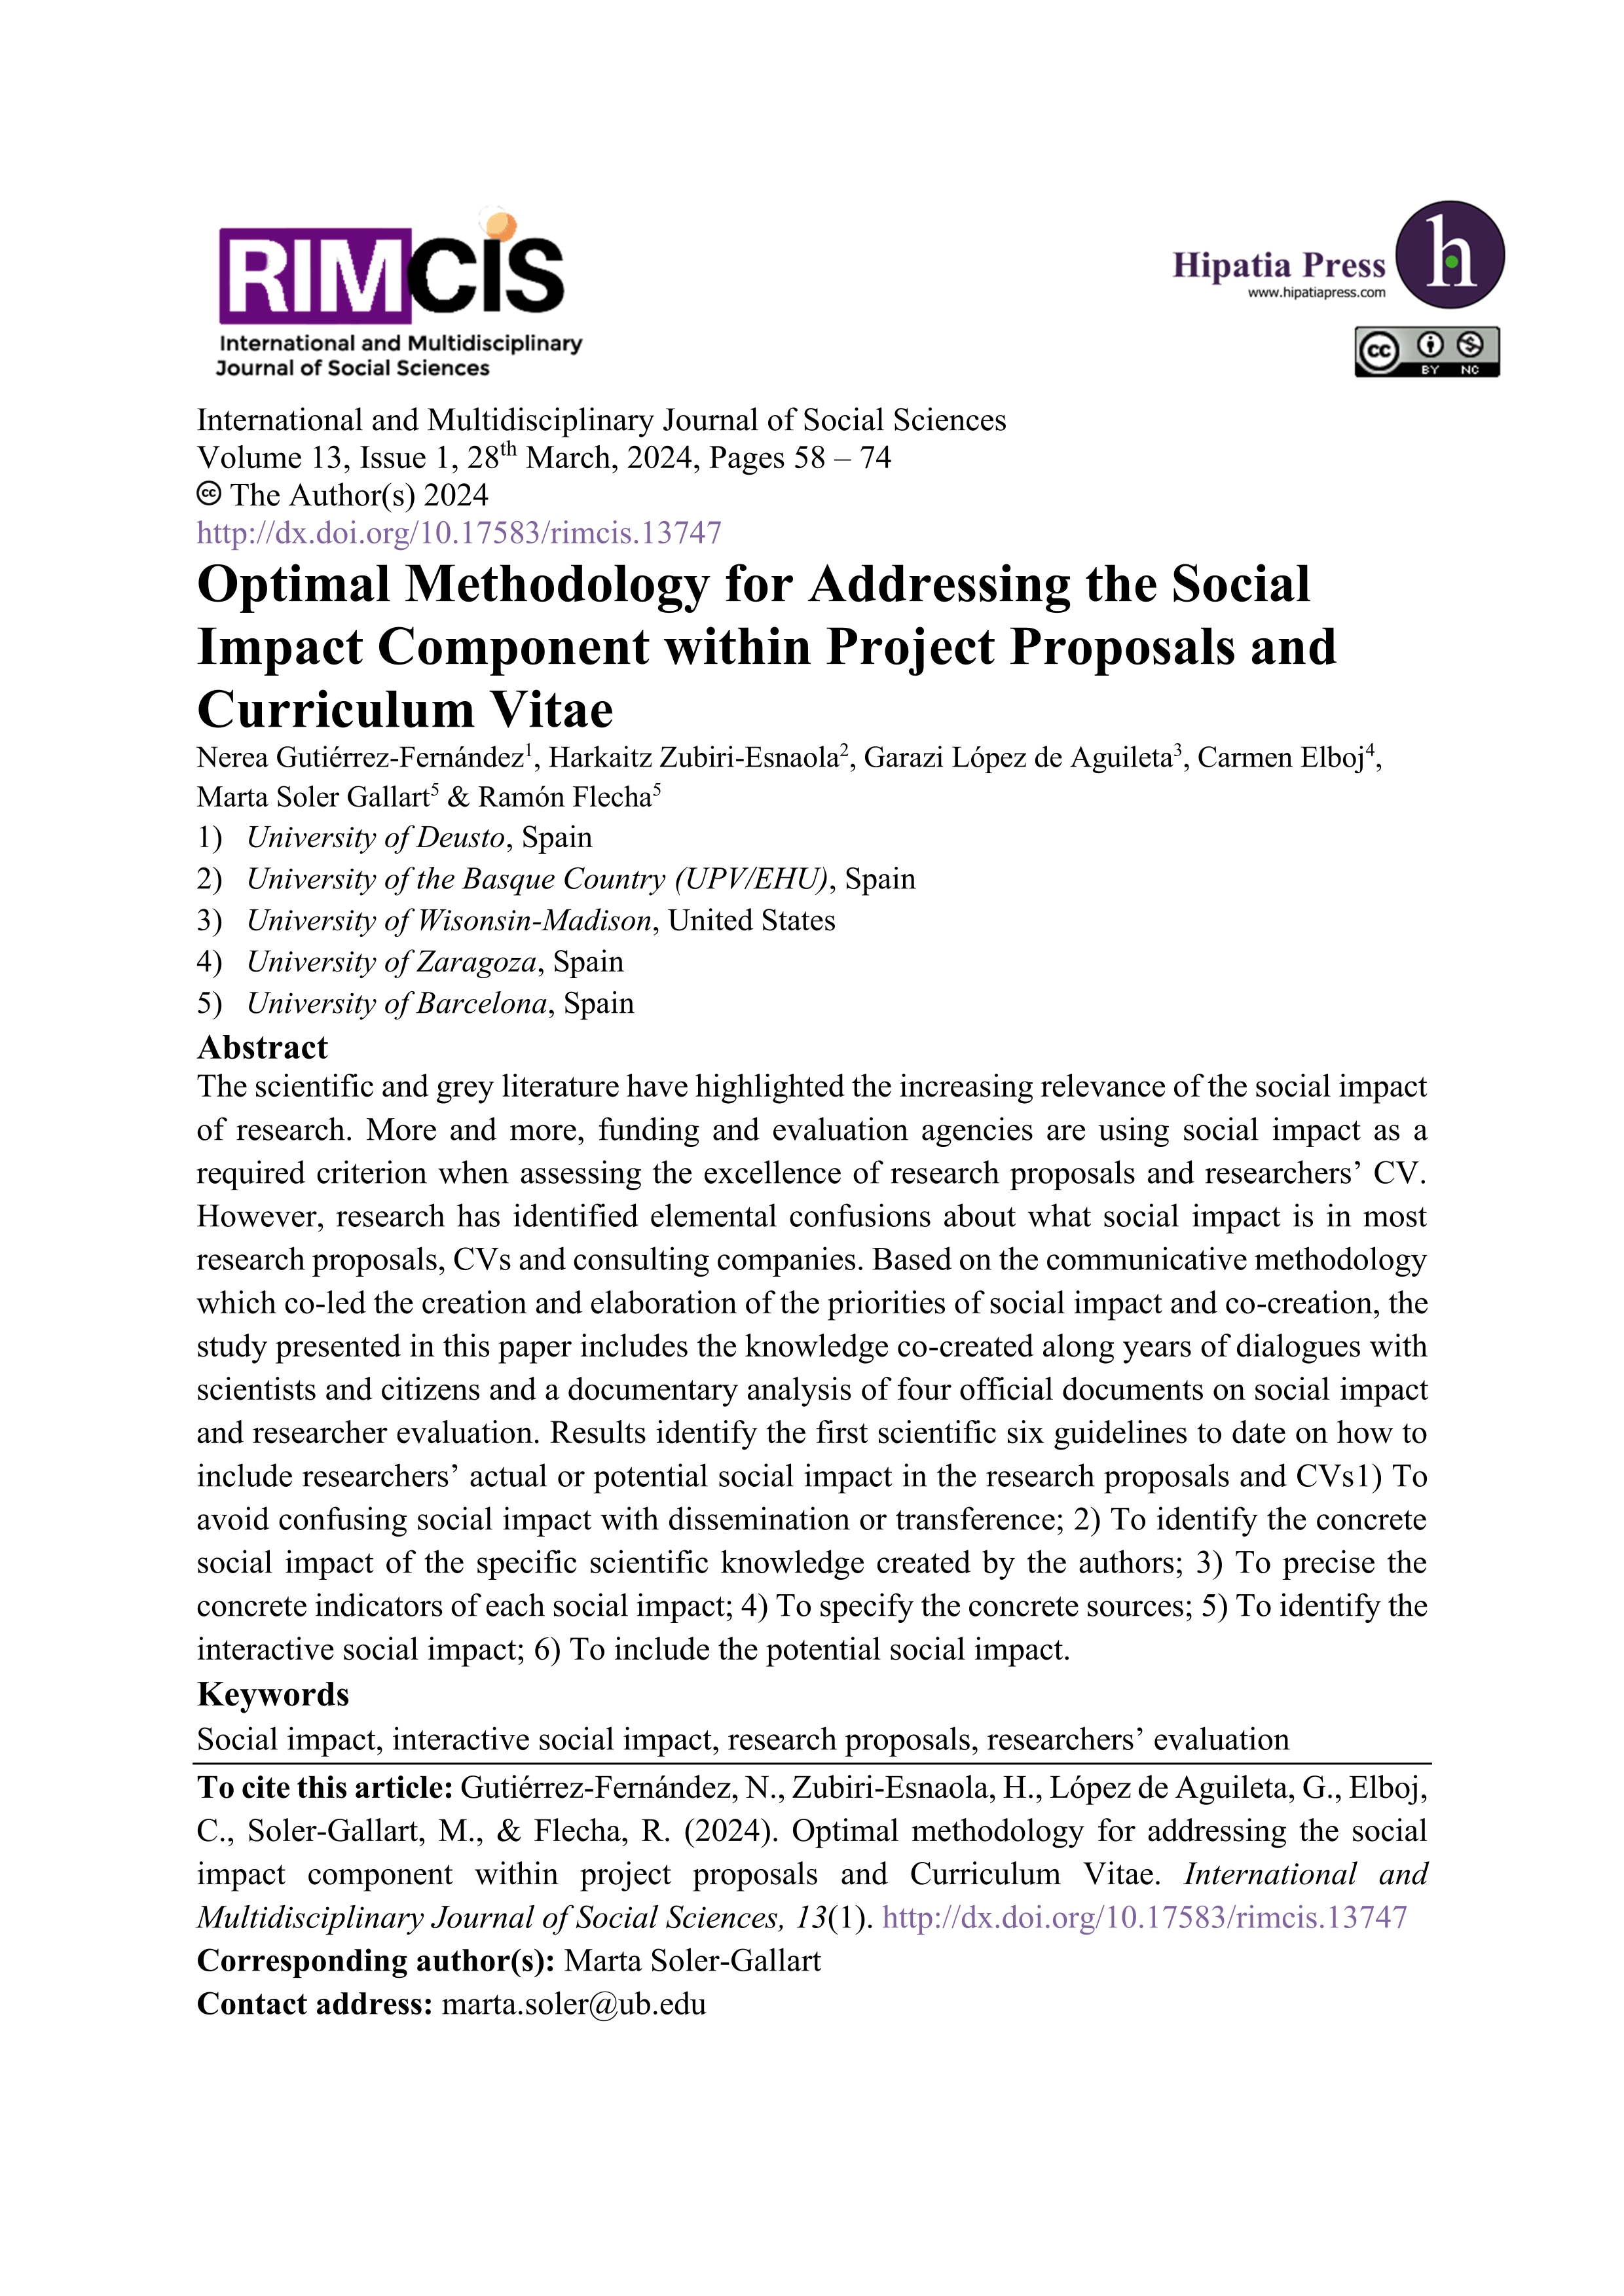 Optimal methodology for addressing the social impact component within project proposals and curriculum vitae